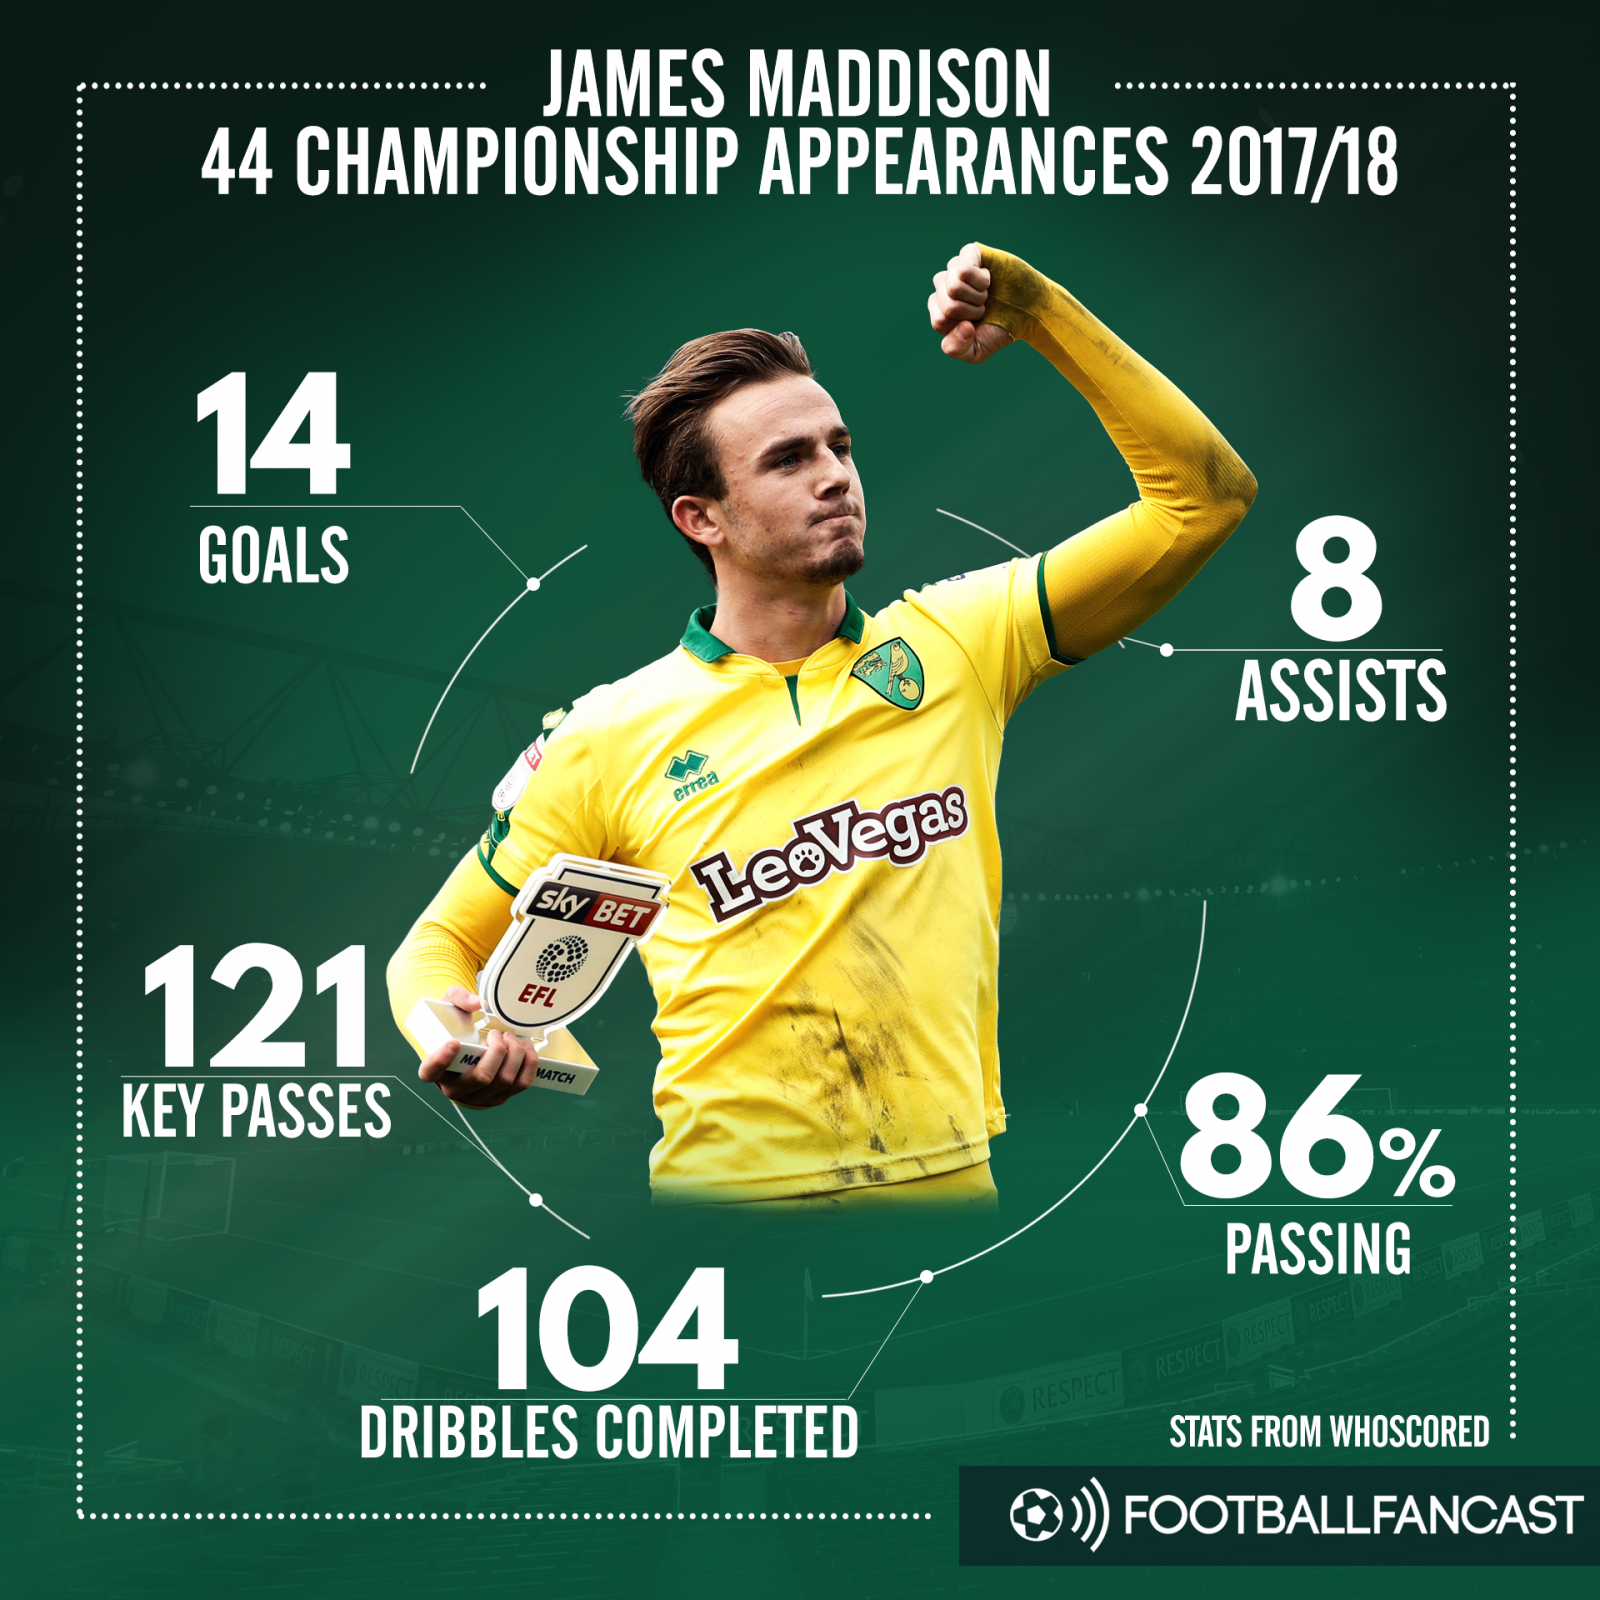 James Maddison's stats for Norwich City in the Championship